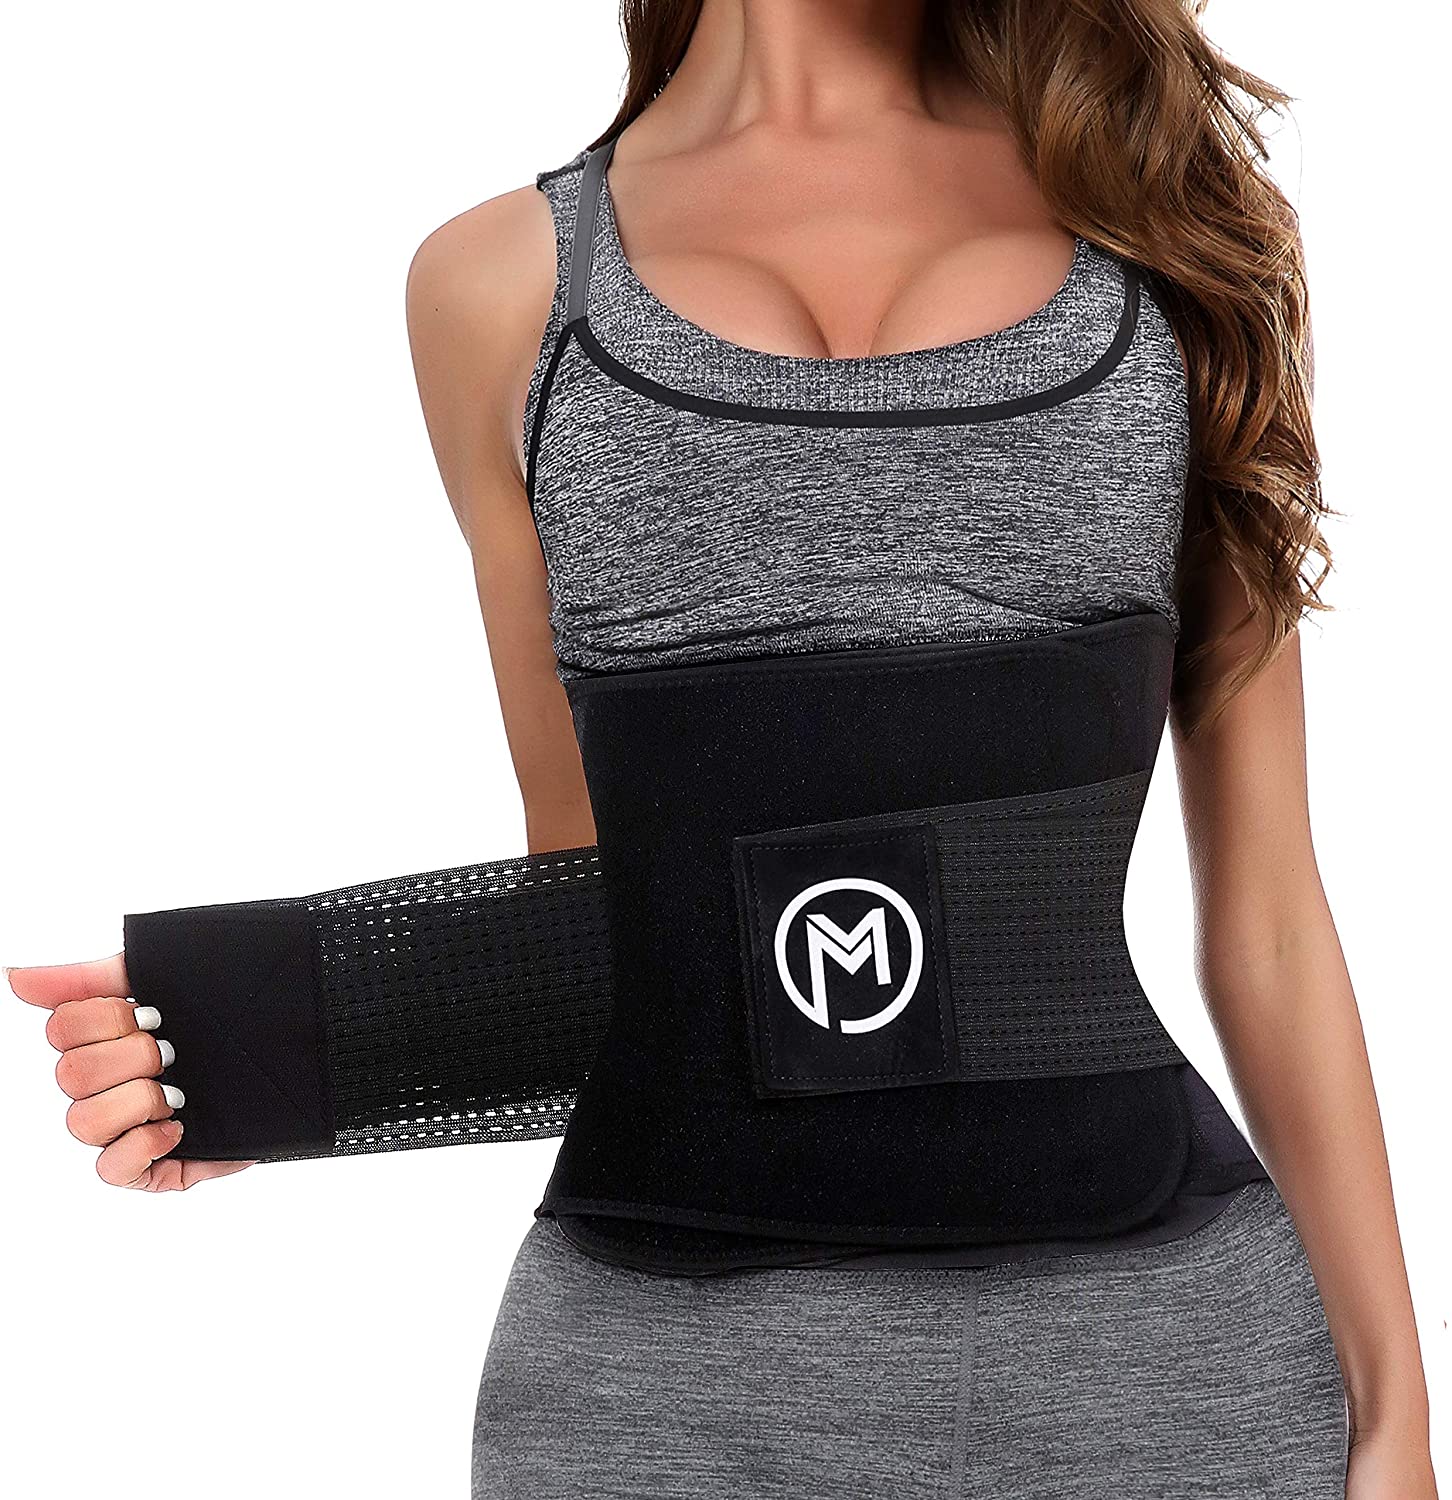 produceren nicotine Kabelbaan Slim For The Summer With The Best Waist Trainer of 2023